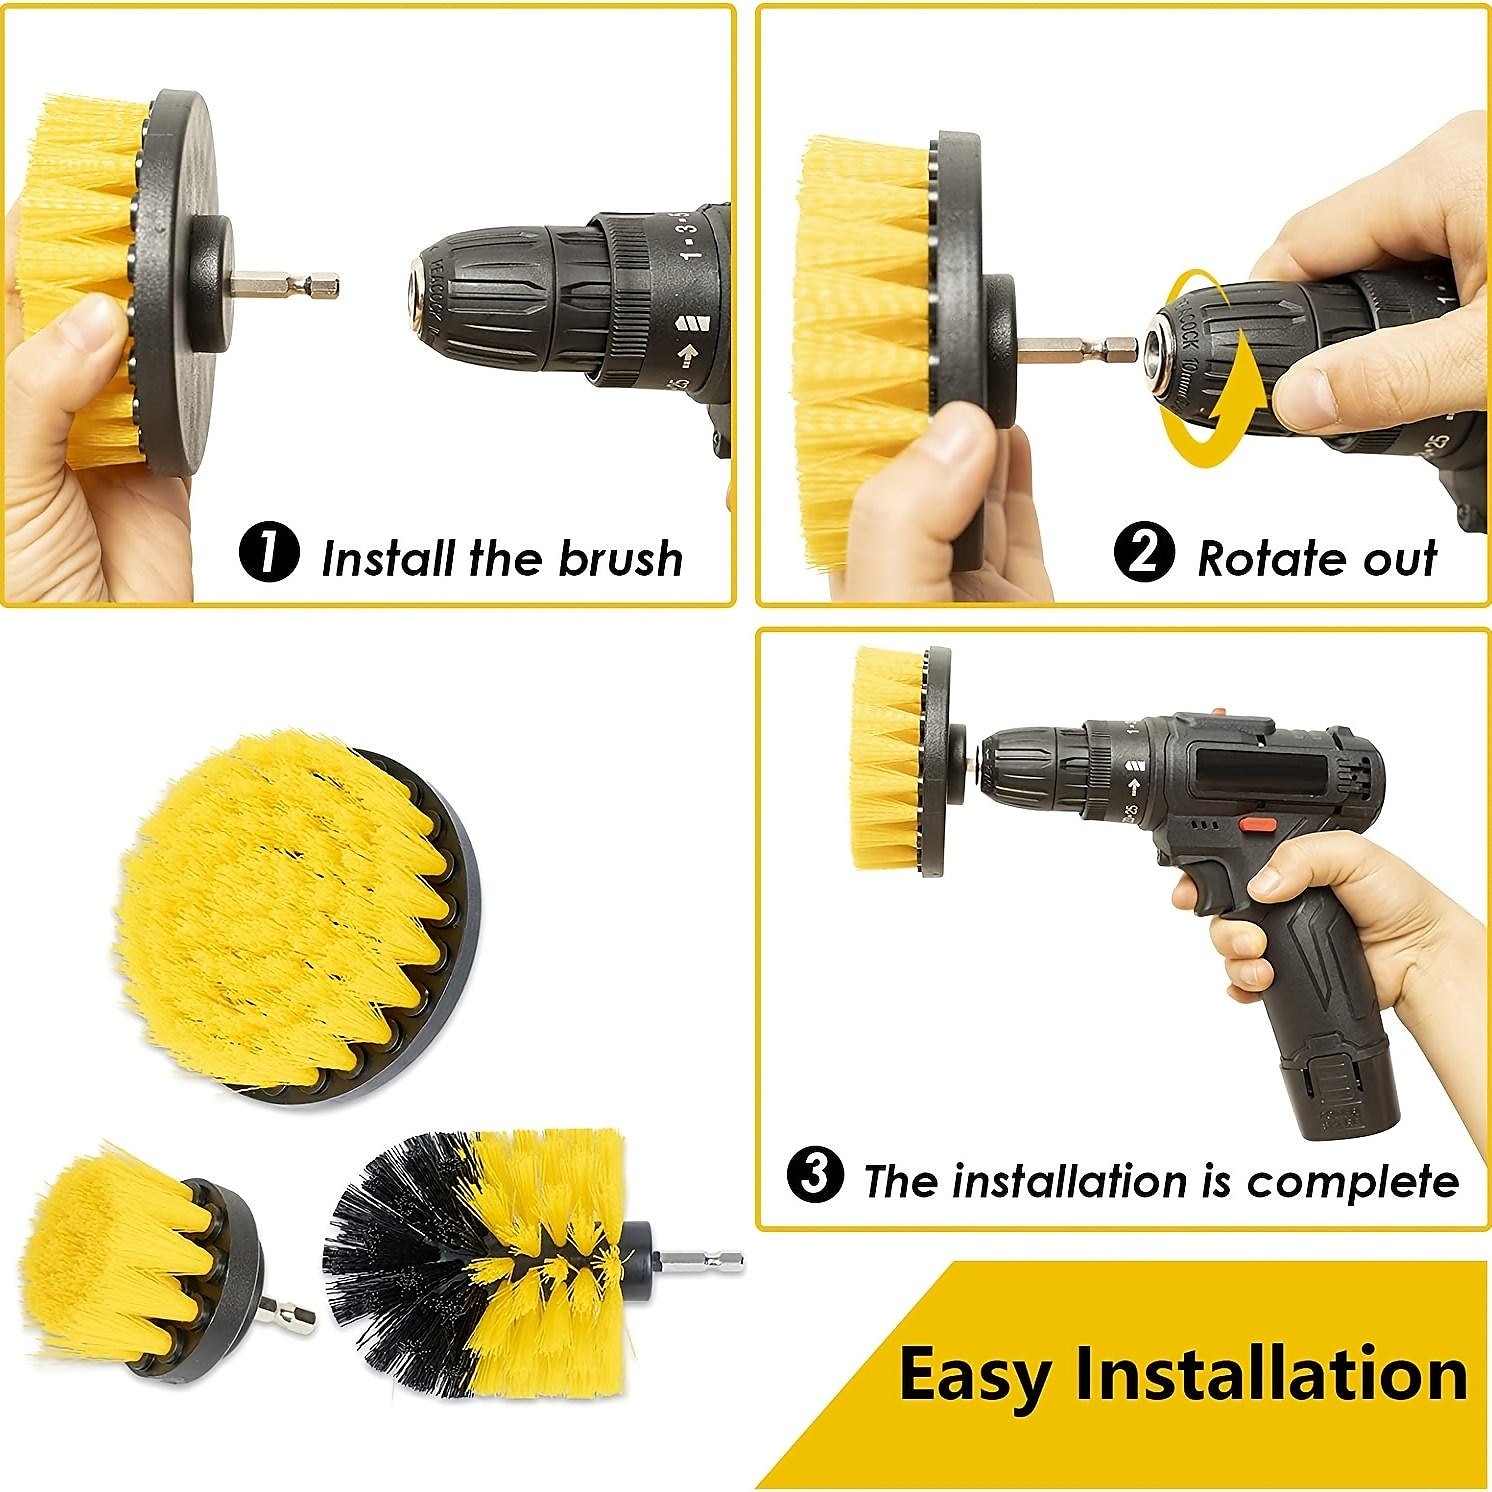 Tile Grout Power Scrubber Cleaning Brushes Cleaner Set For